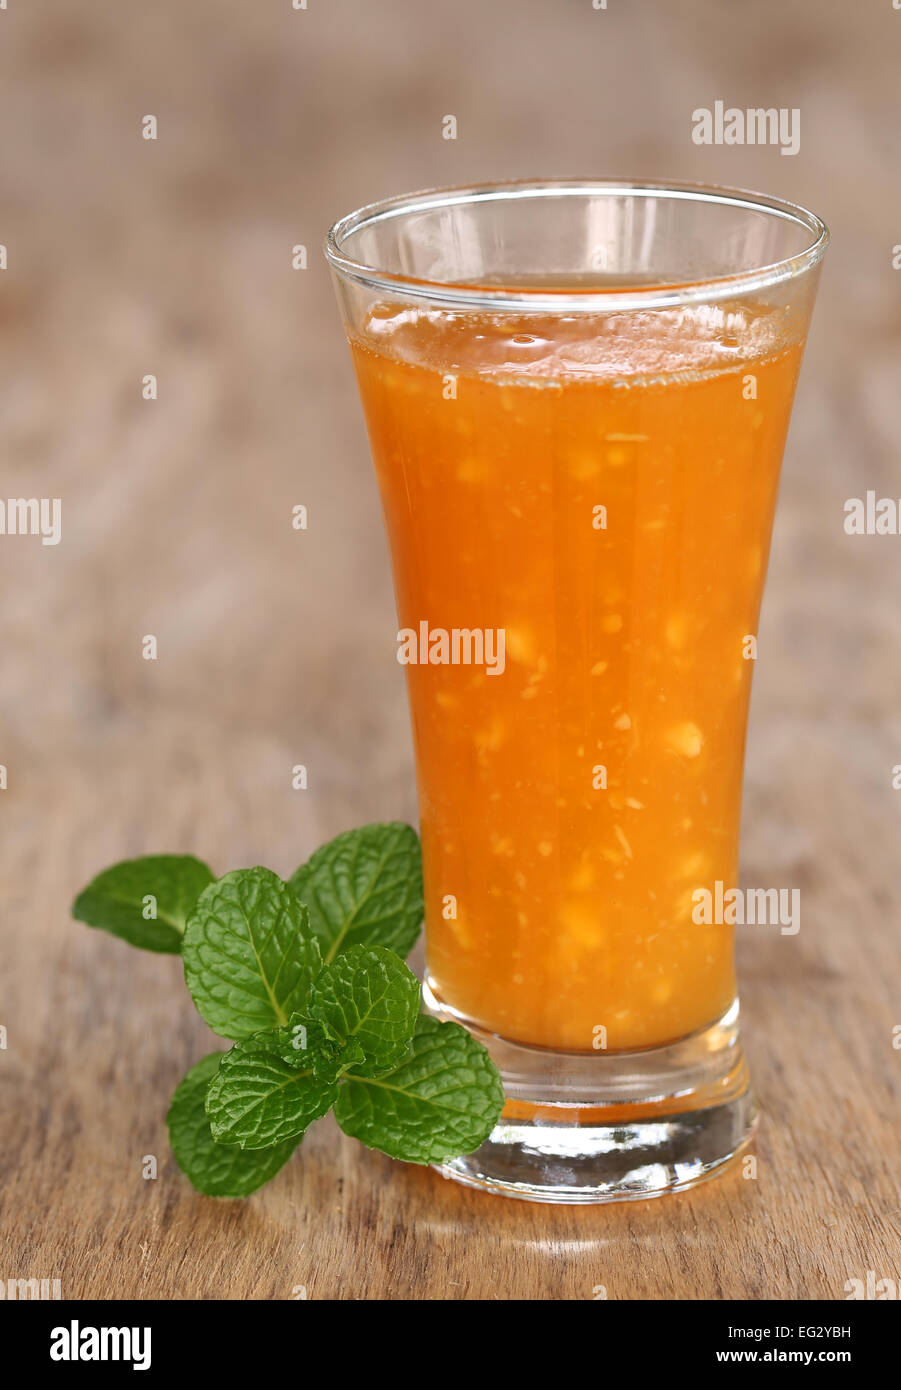 Medicinal 'wood appel' juice and mint leaves Stock Photo